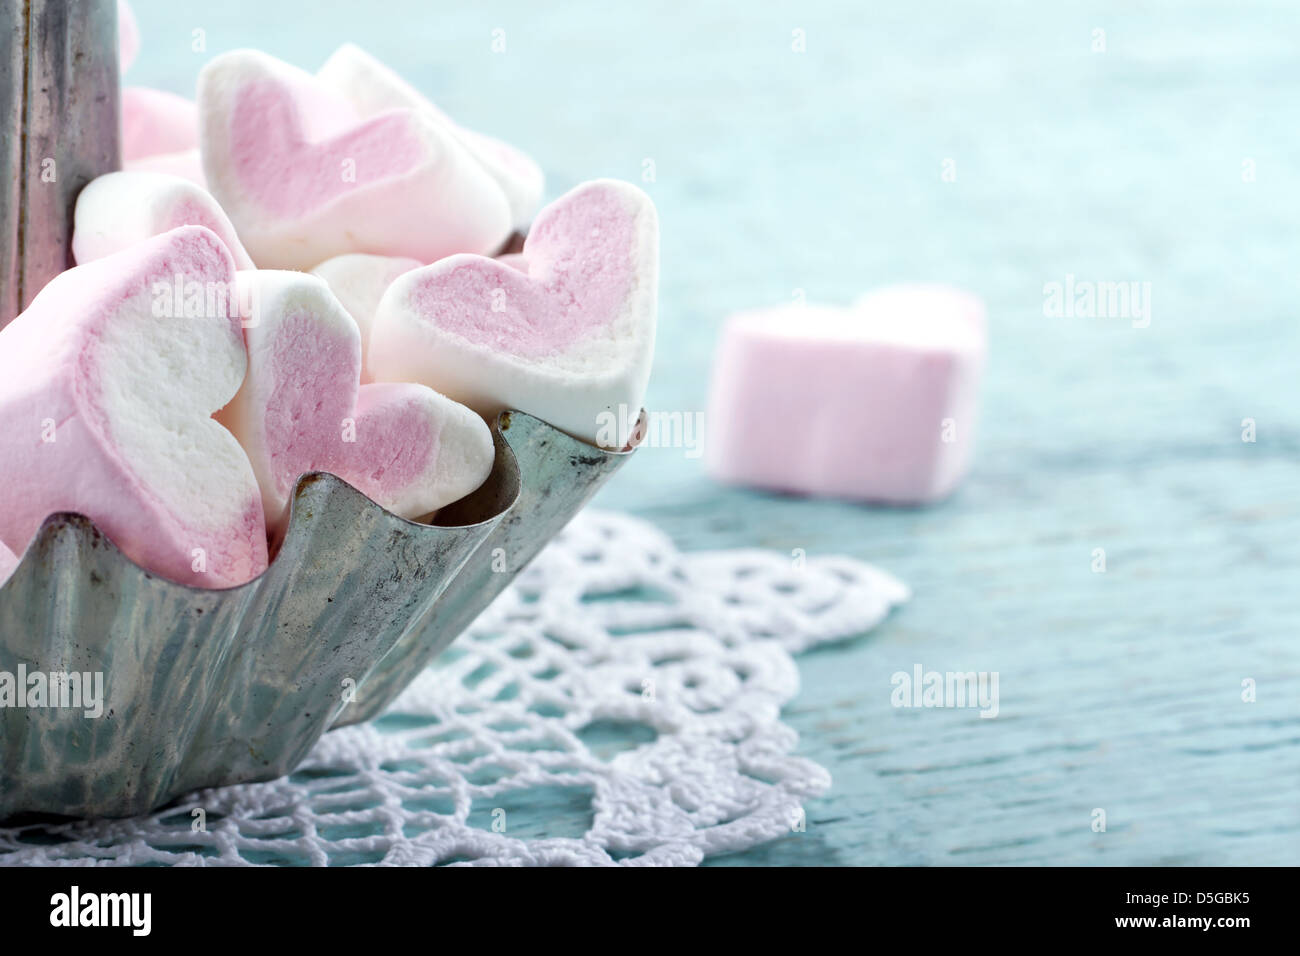 Heart shaped marshmallows in a metal cupcake Photograph by Anna